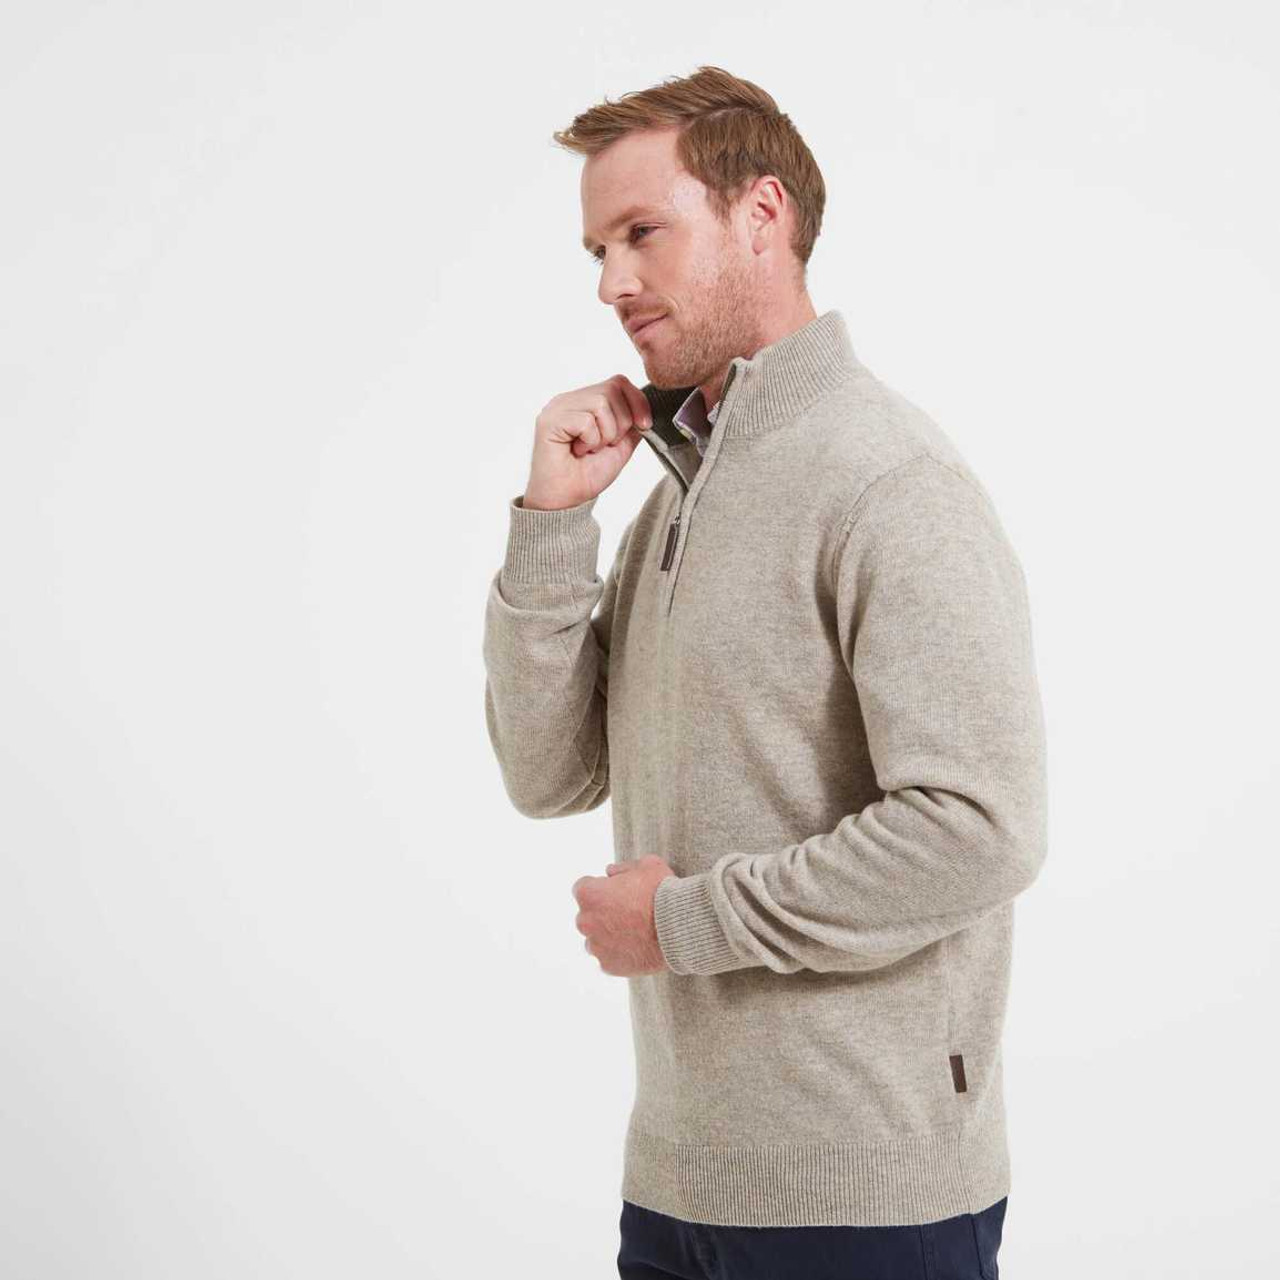 Lambswool 1/4 Zip Jumper60781 - Gordy & Sons Outfitters